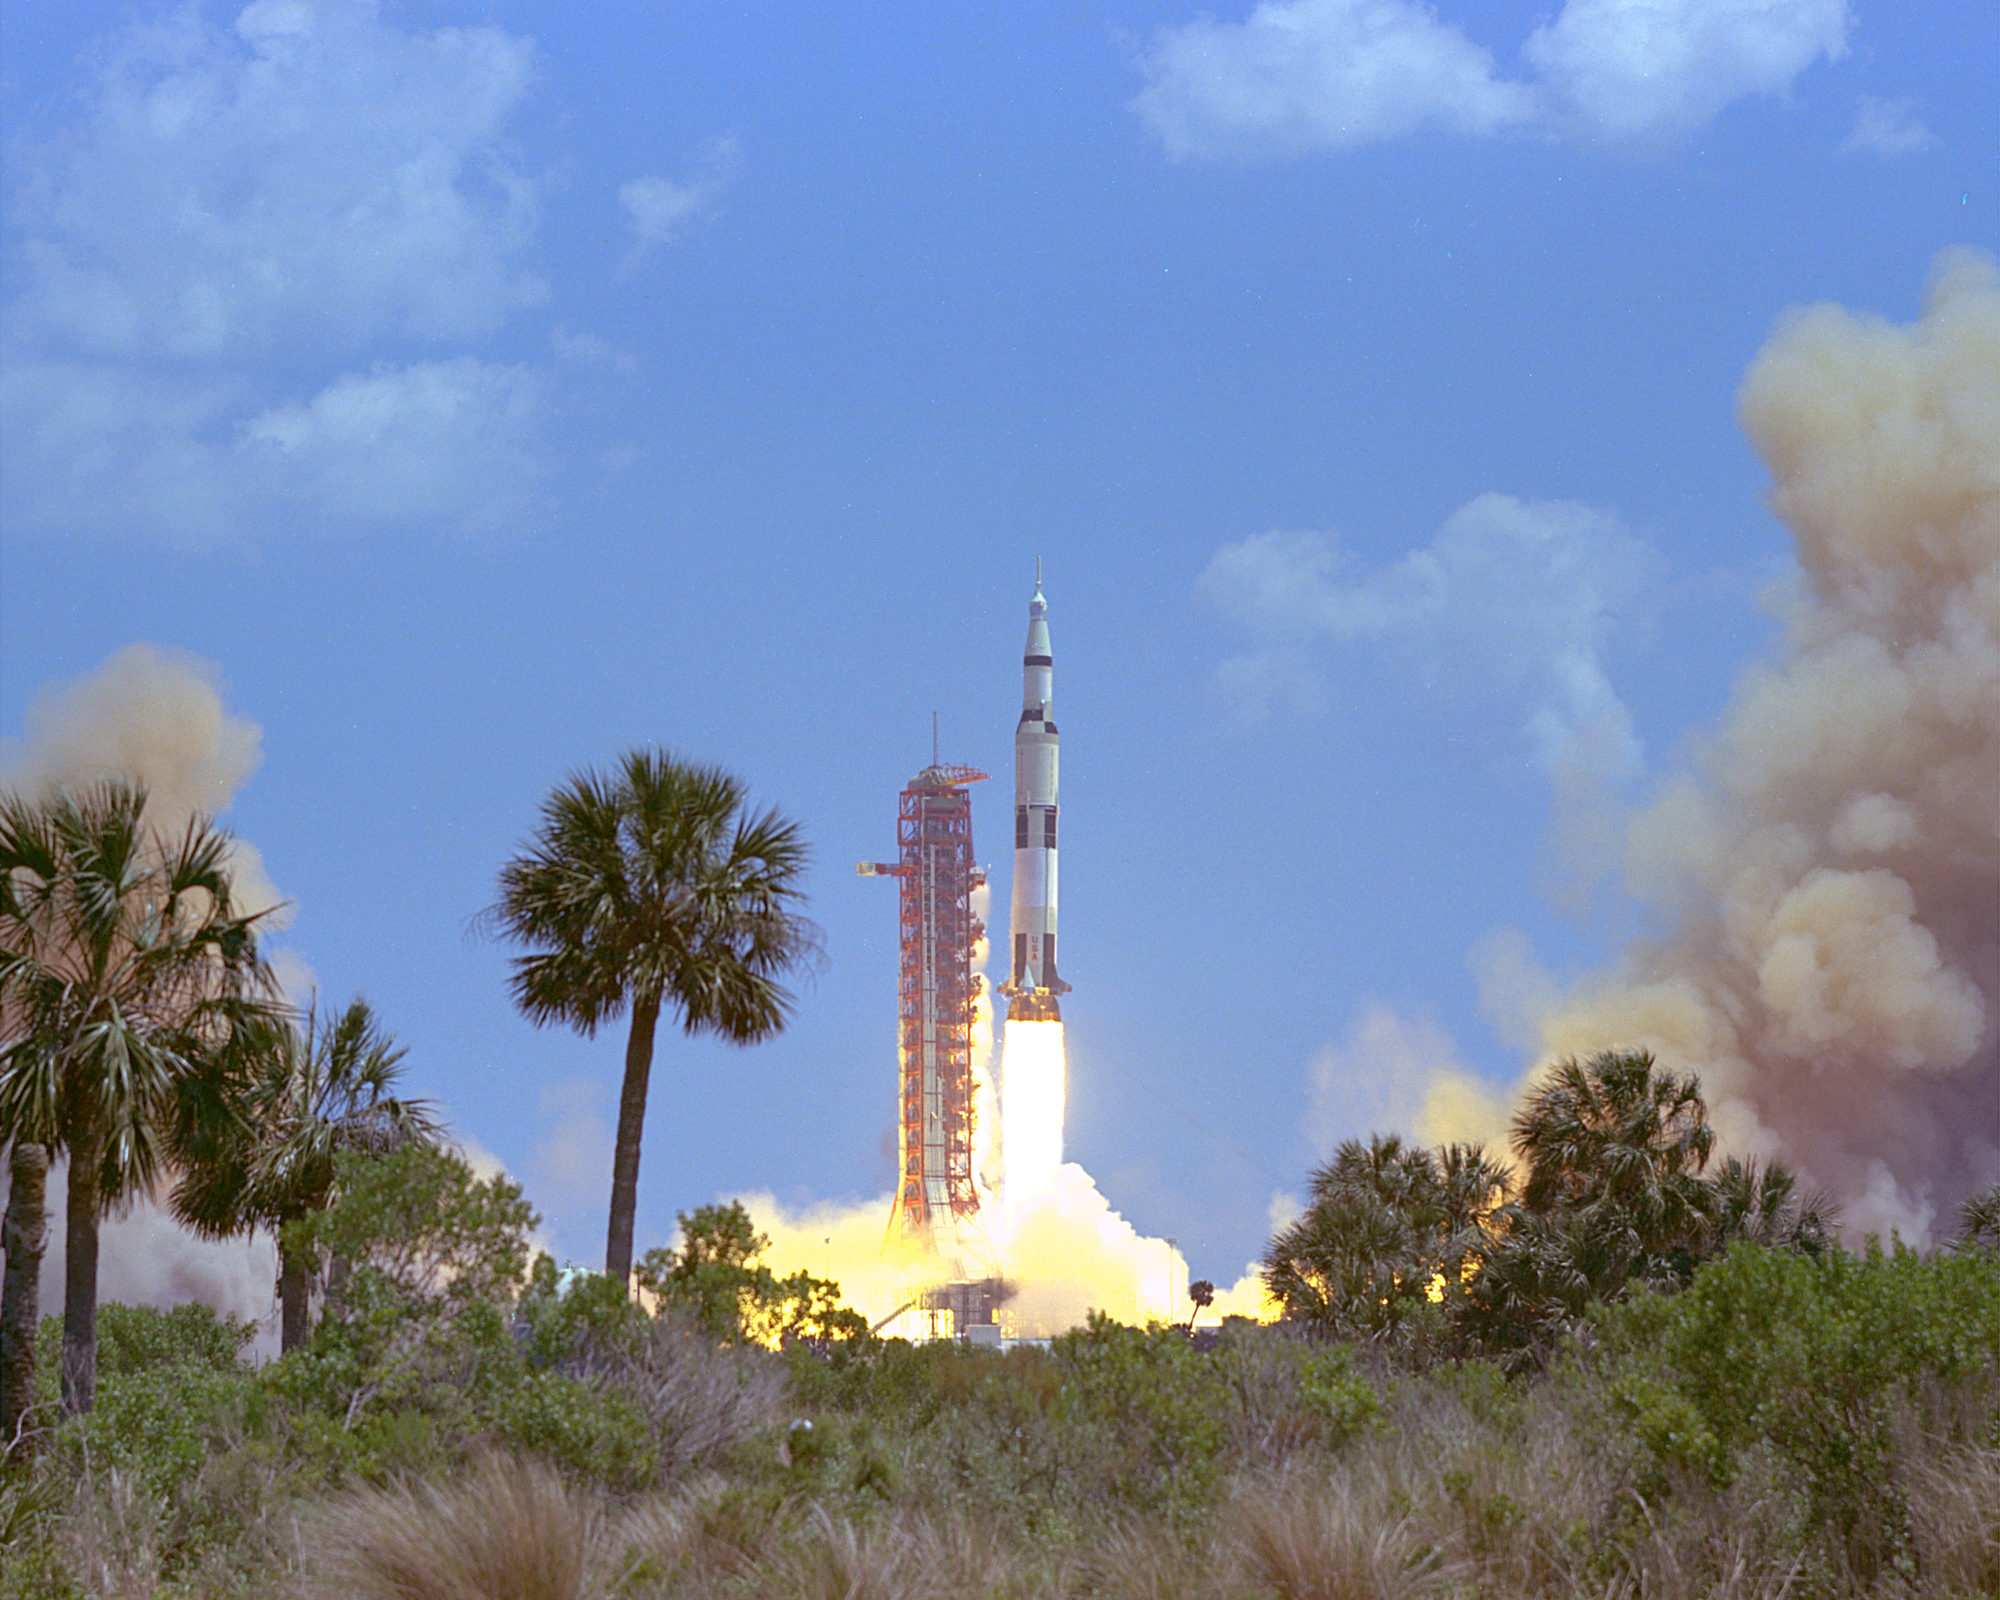 The white and black Apollo 16 rocket ship blasts off from the red launch pad against a blue sky with green and brown palm trees and brush in the foreground